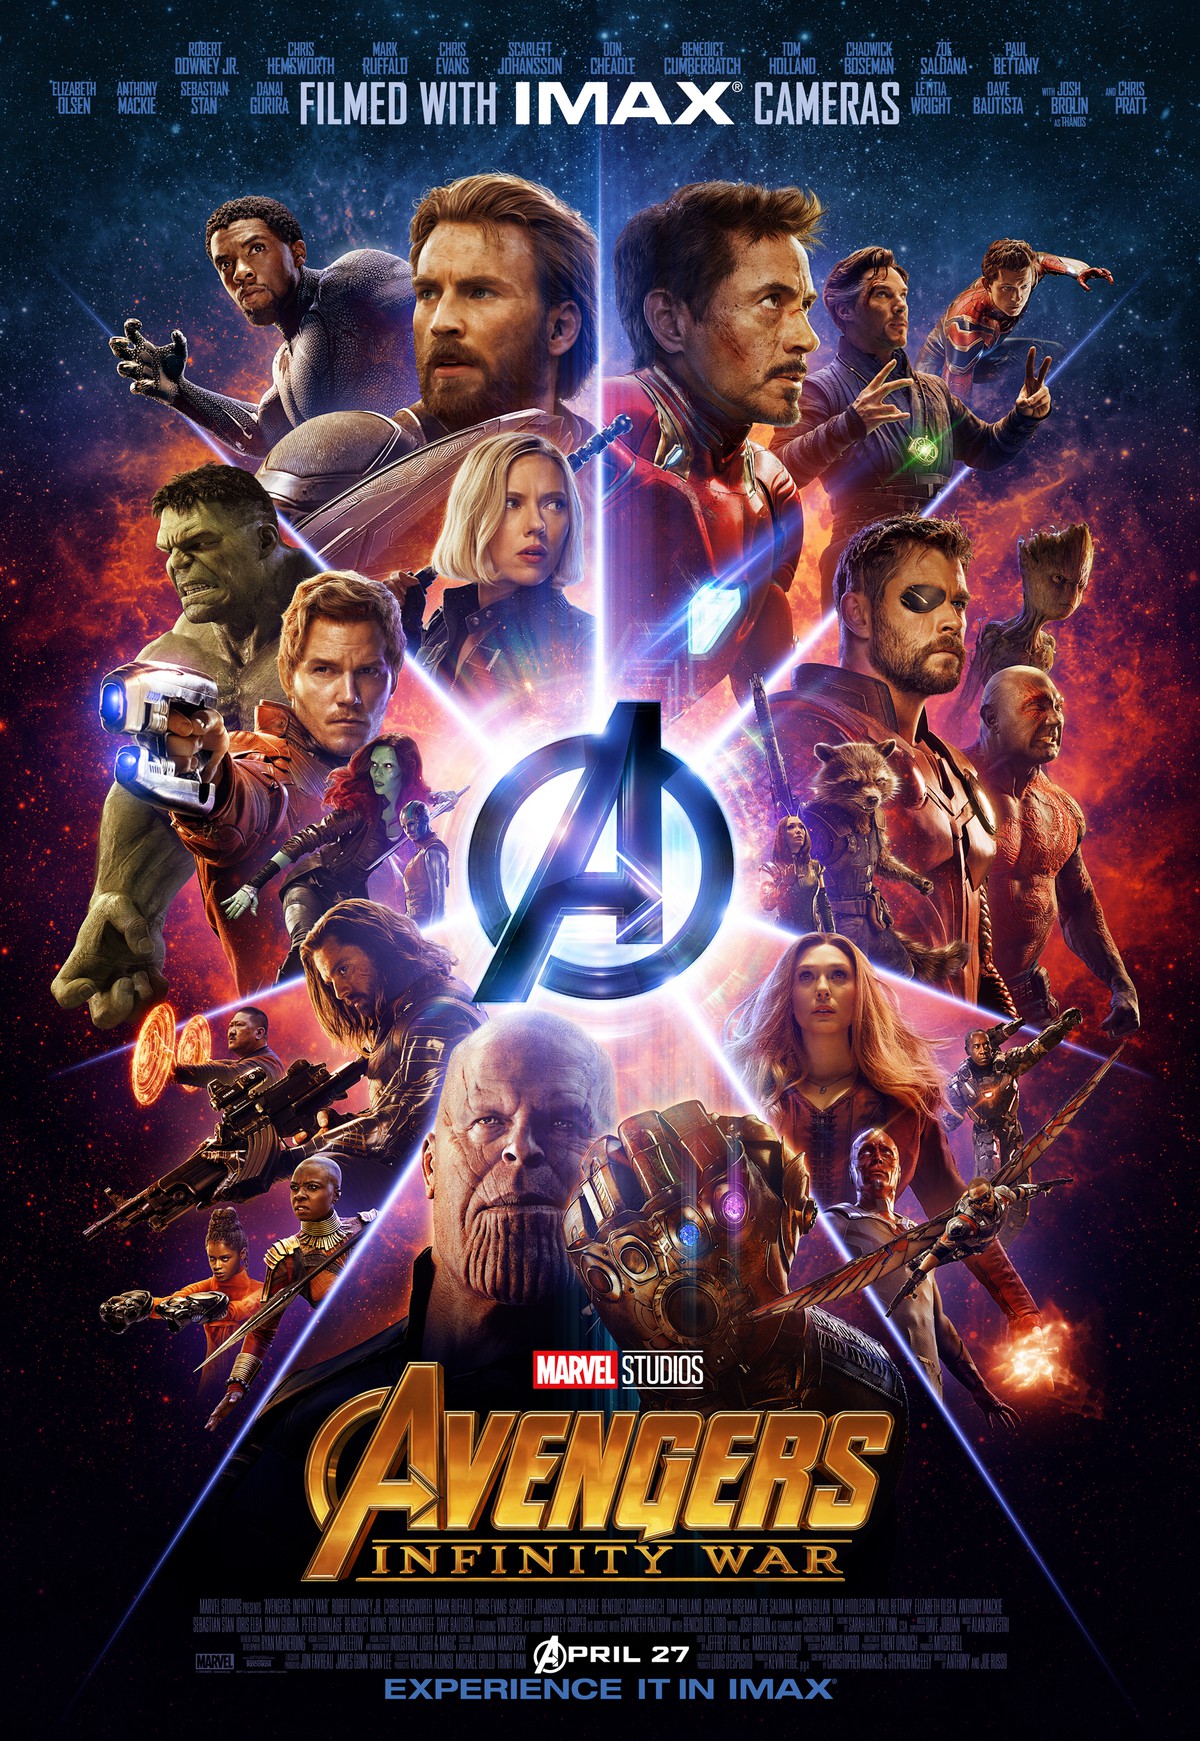 New IMAX Behind the Frame AVENGERS: INFINITY WAR Episode!